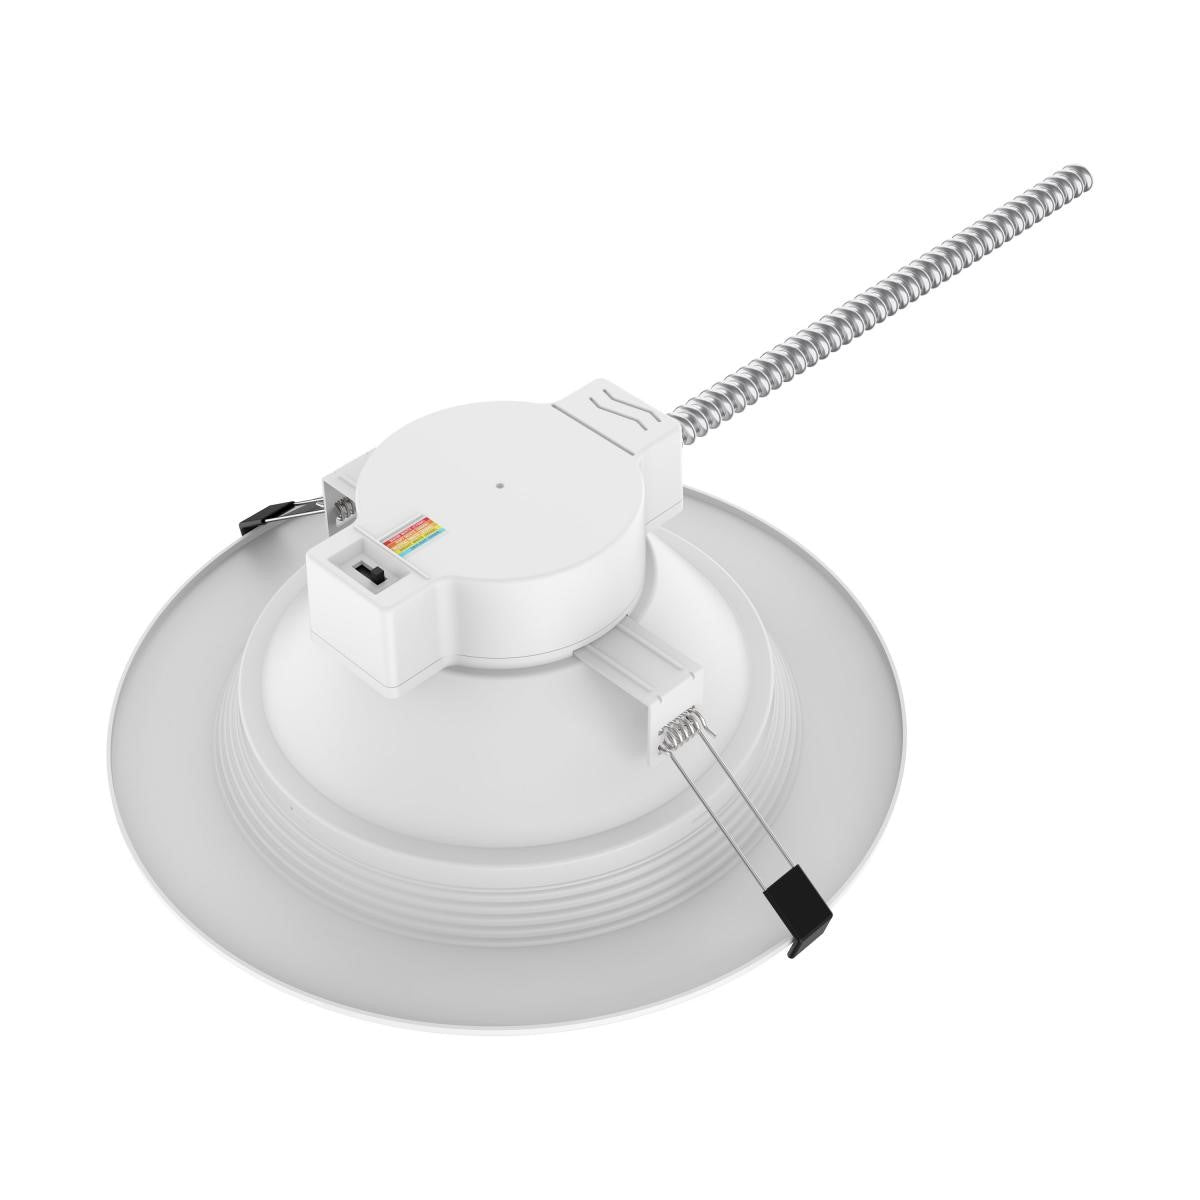 10 Inch Commercial LED Downlight, Round, 30 Watt, 3500 Lumens, Selectable CCT, 2700K to 5000K, Baffle Trim